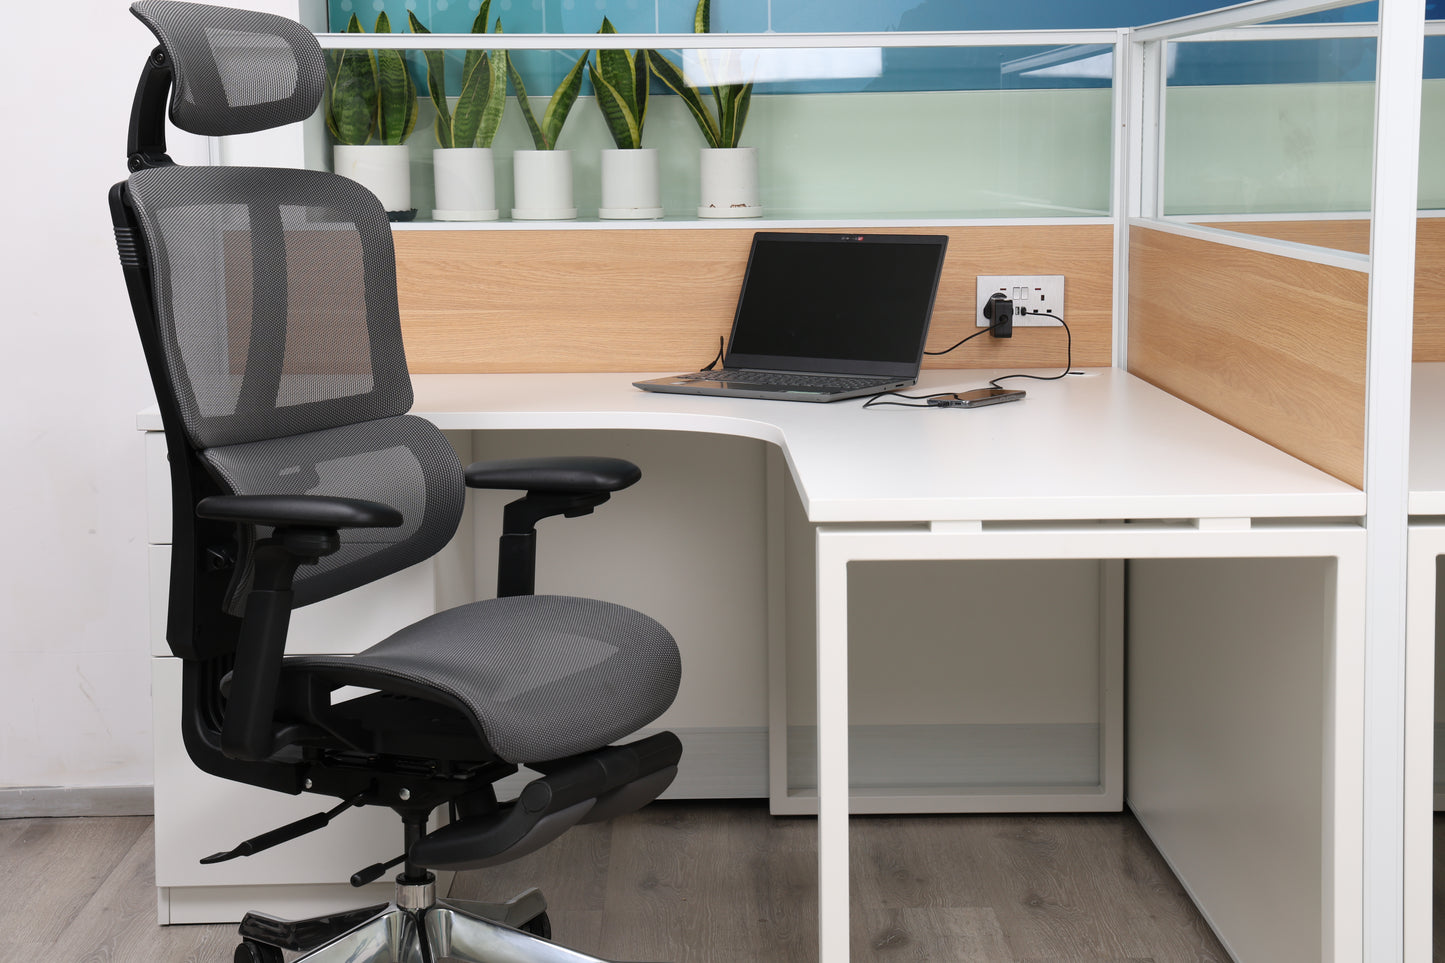 4 in 1 Office Furniture Package (Partition/L-shaped Desk & Drawers/Ergonomic Chair) - for 2 pax